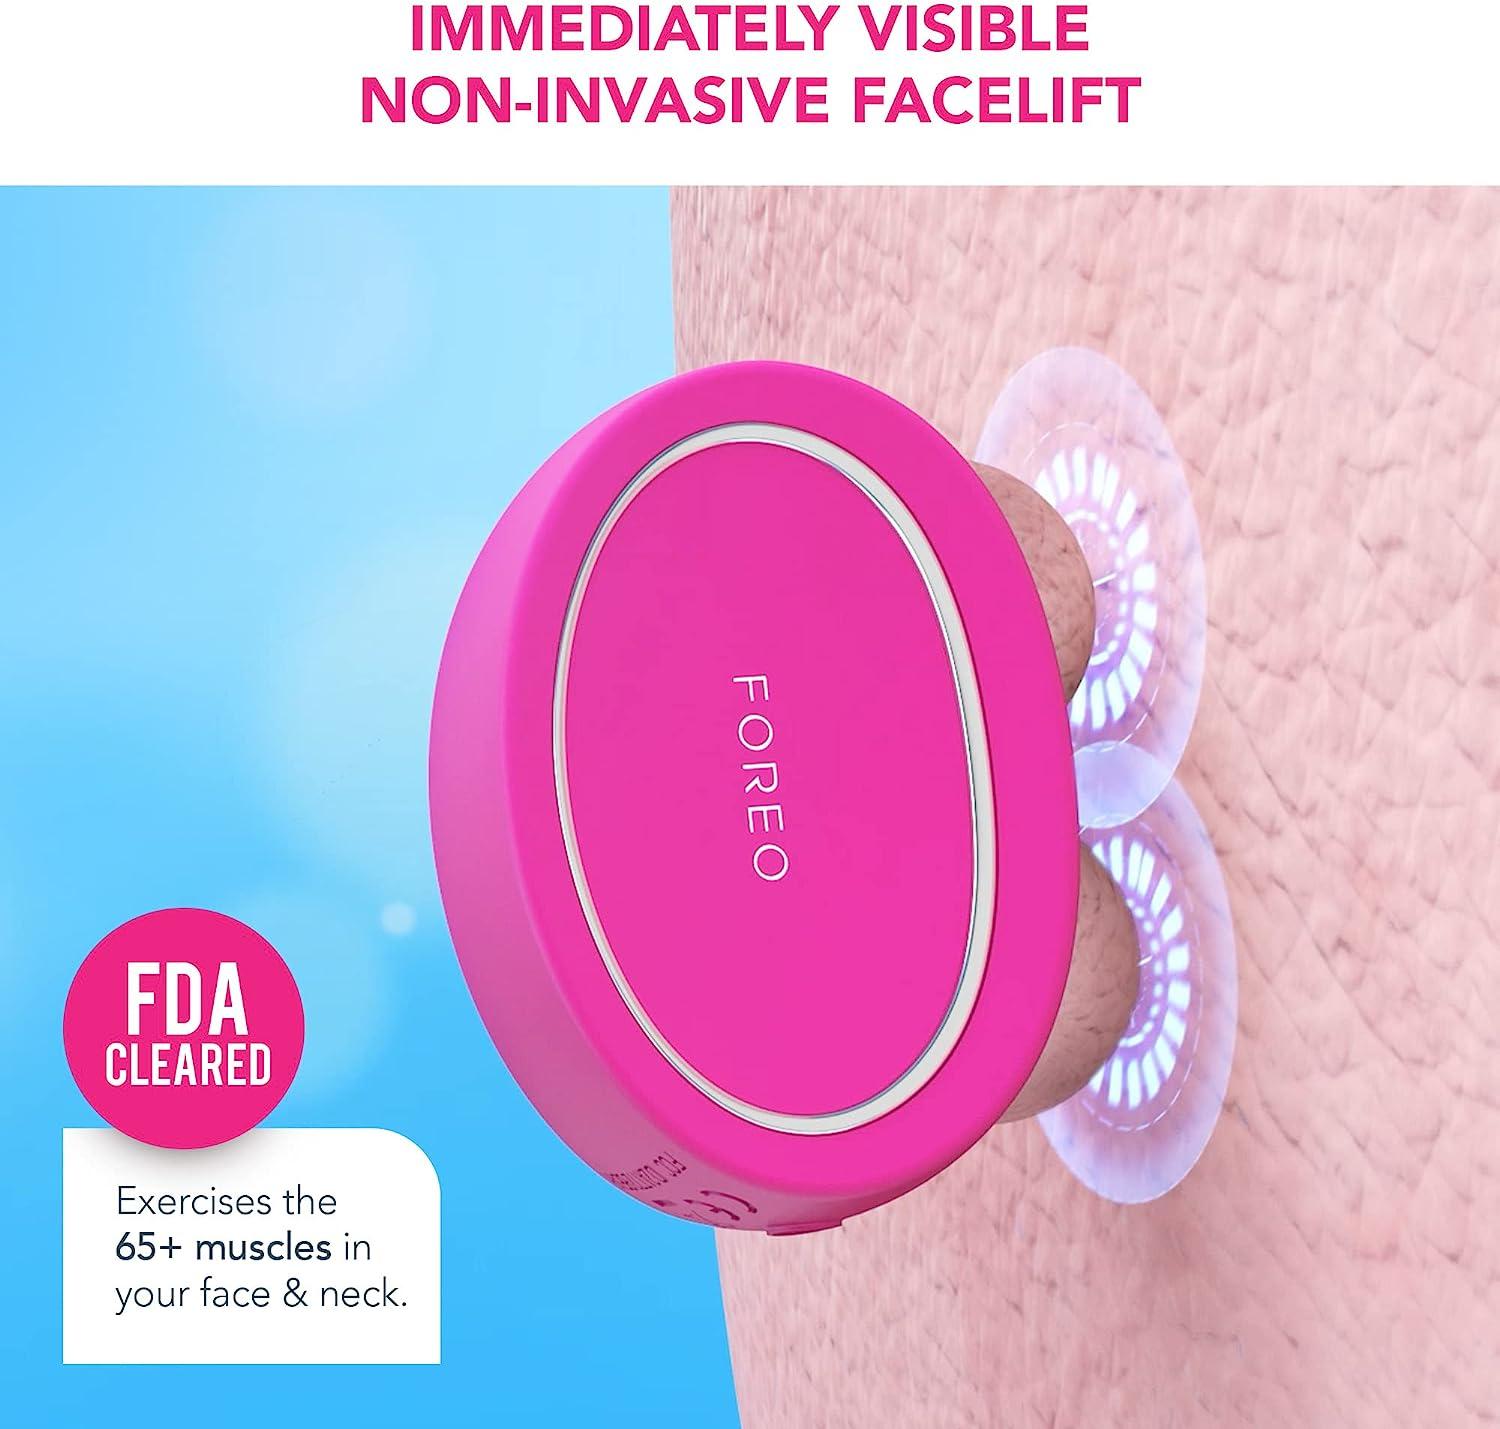 Foreo's Bear microcurrent facial device is high-tech skincare that lacks  claws